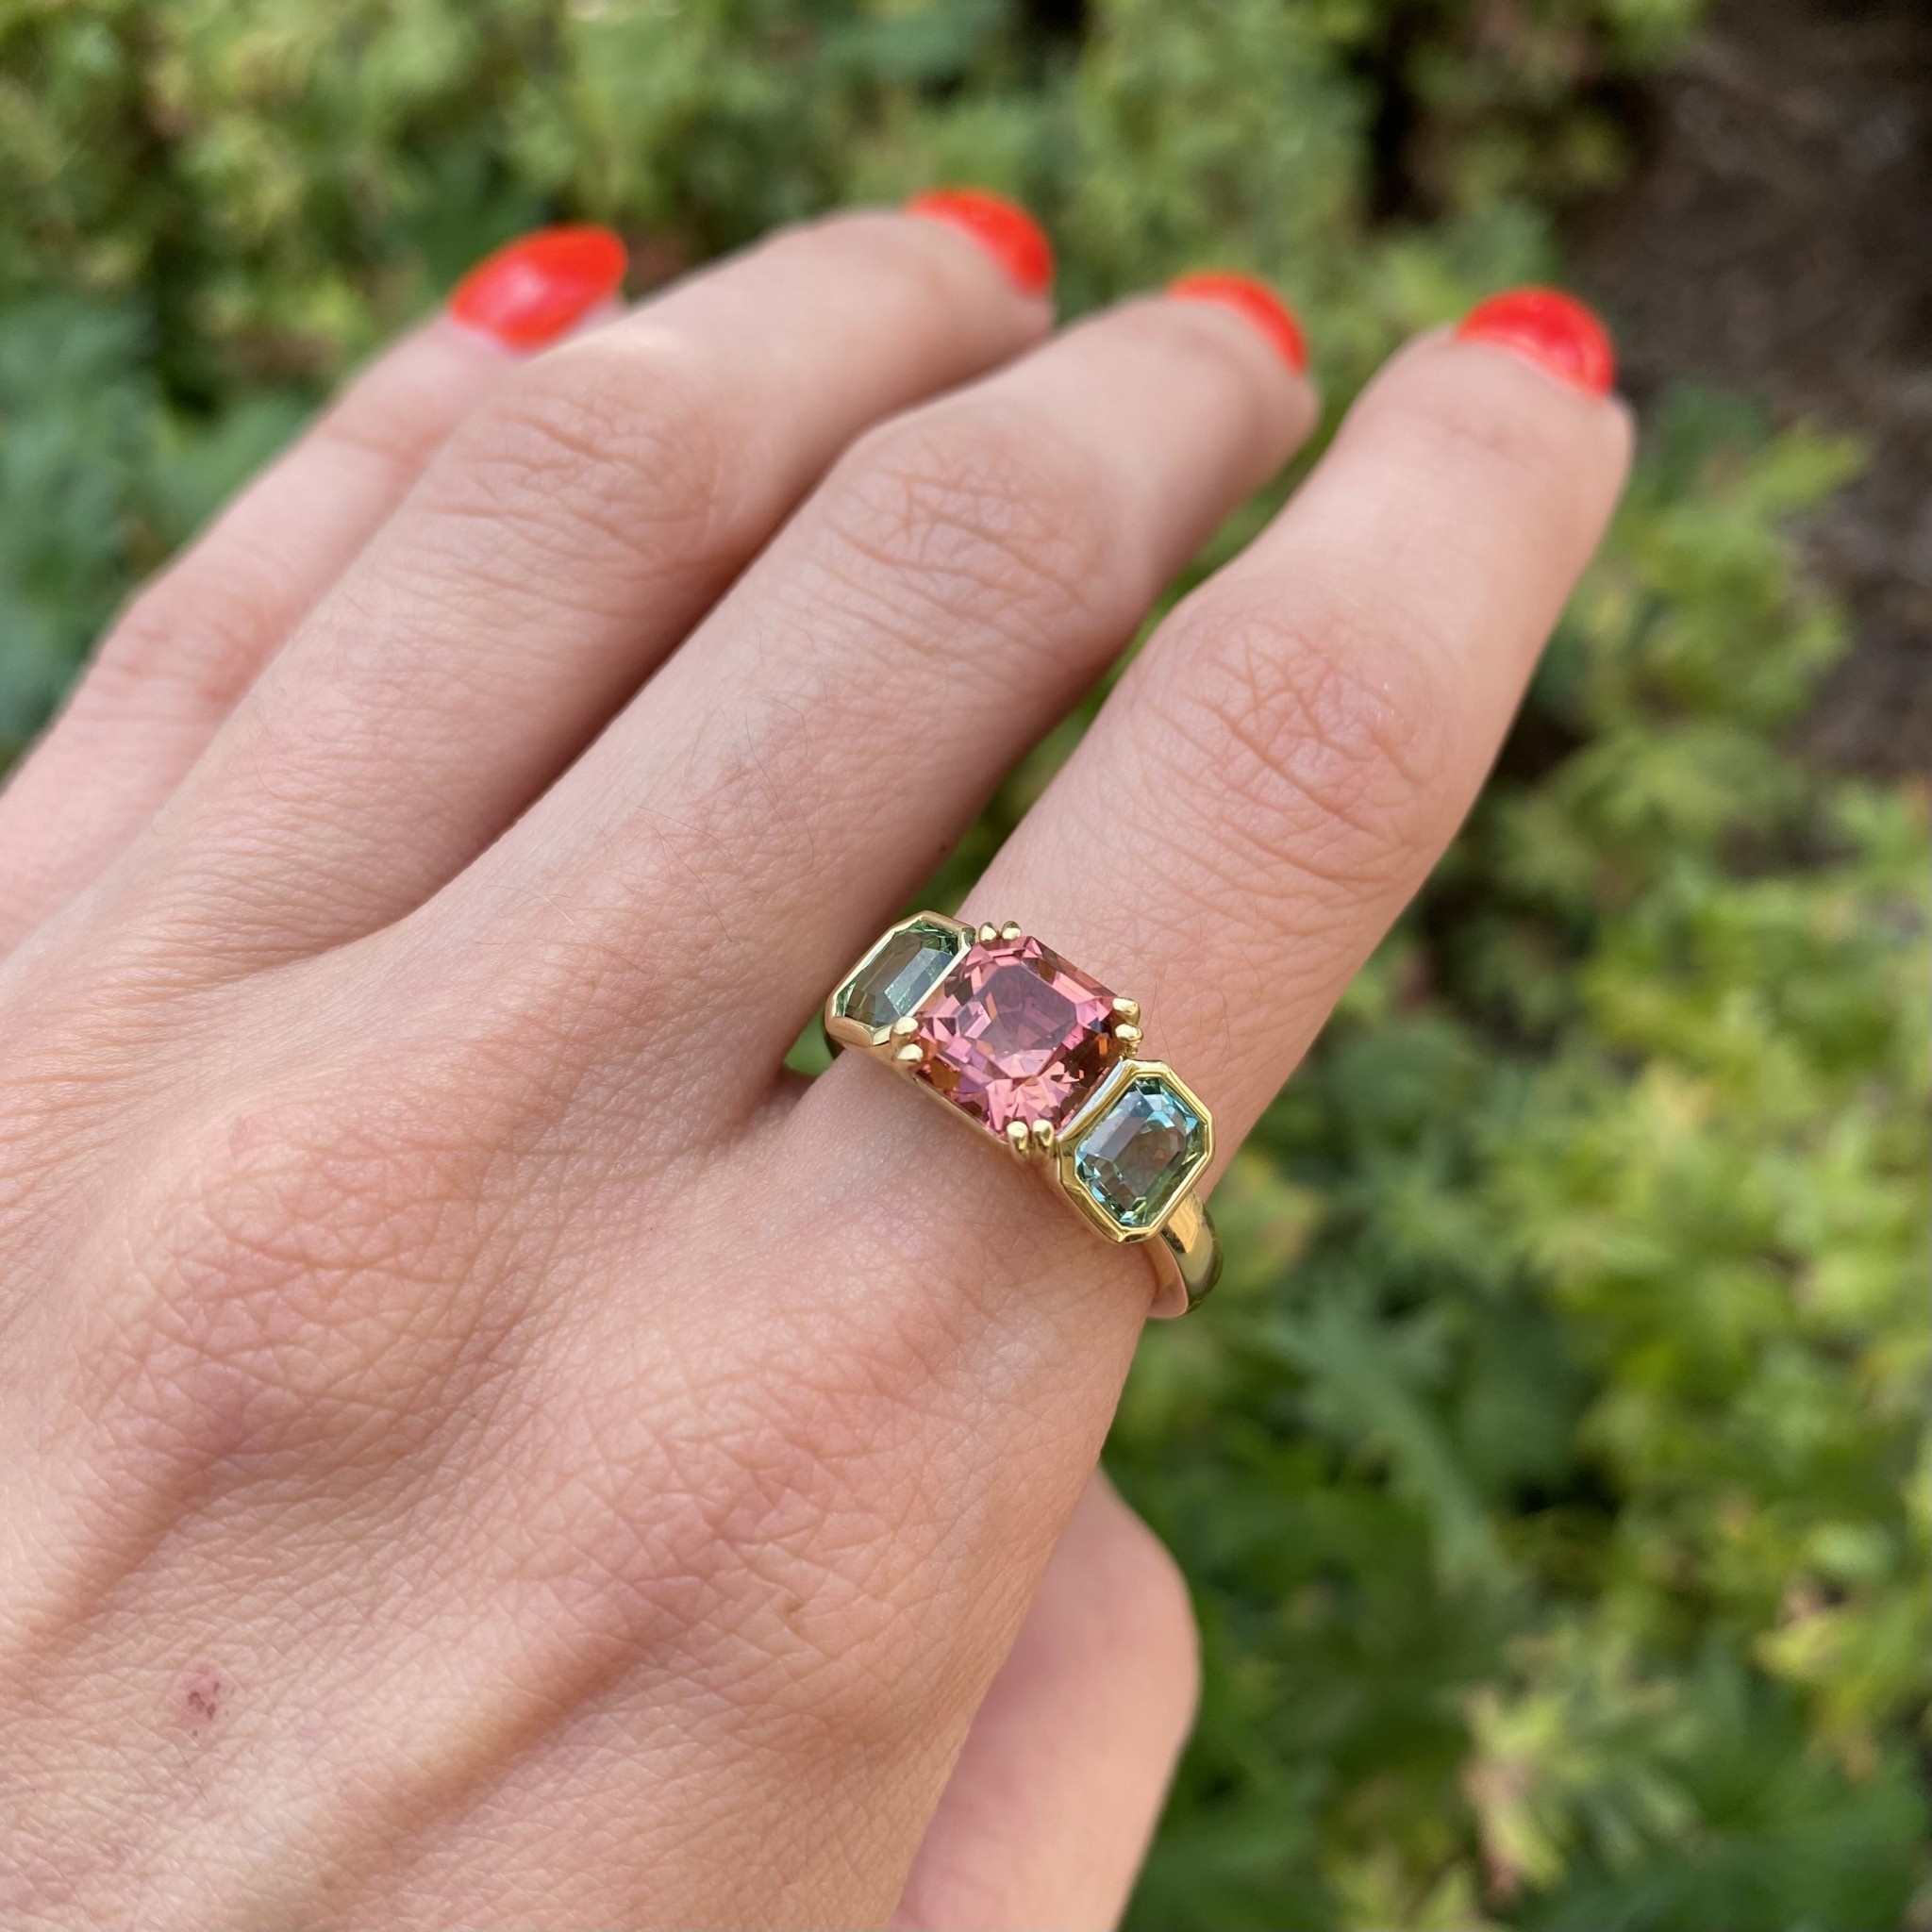 Unique Pink Tourmaline and Diamond Ring from Ruth Tomlinson